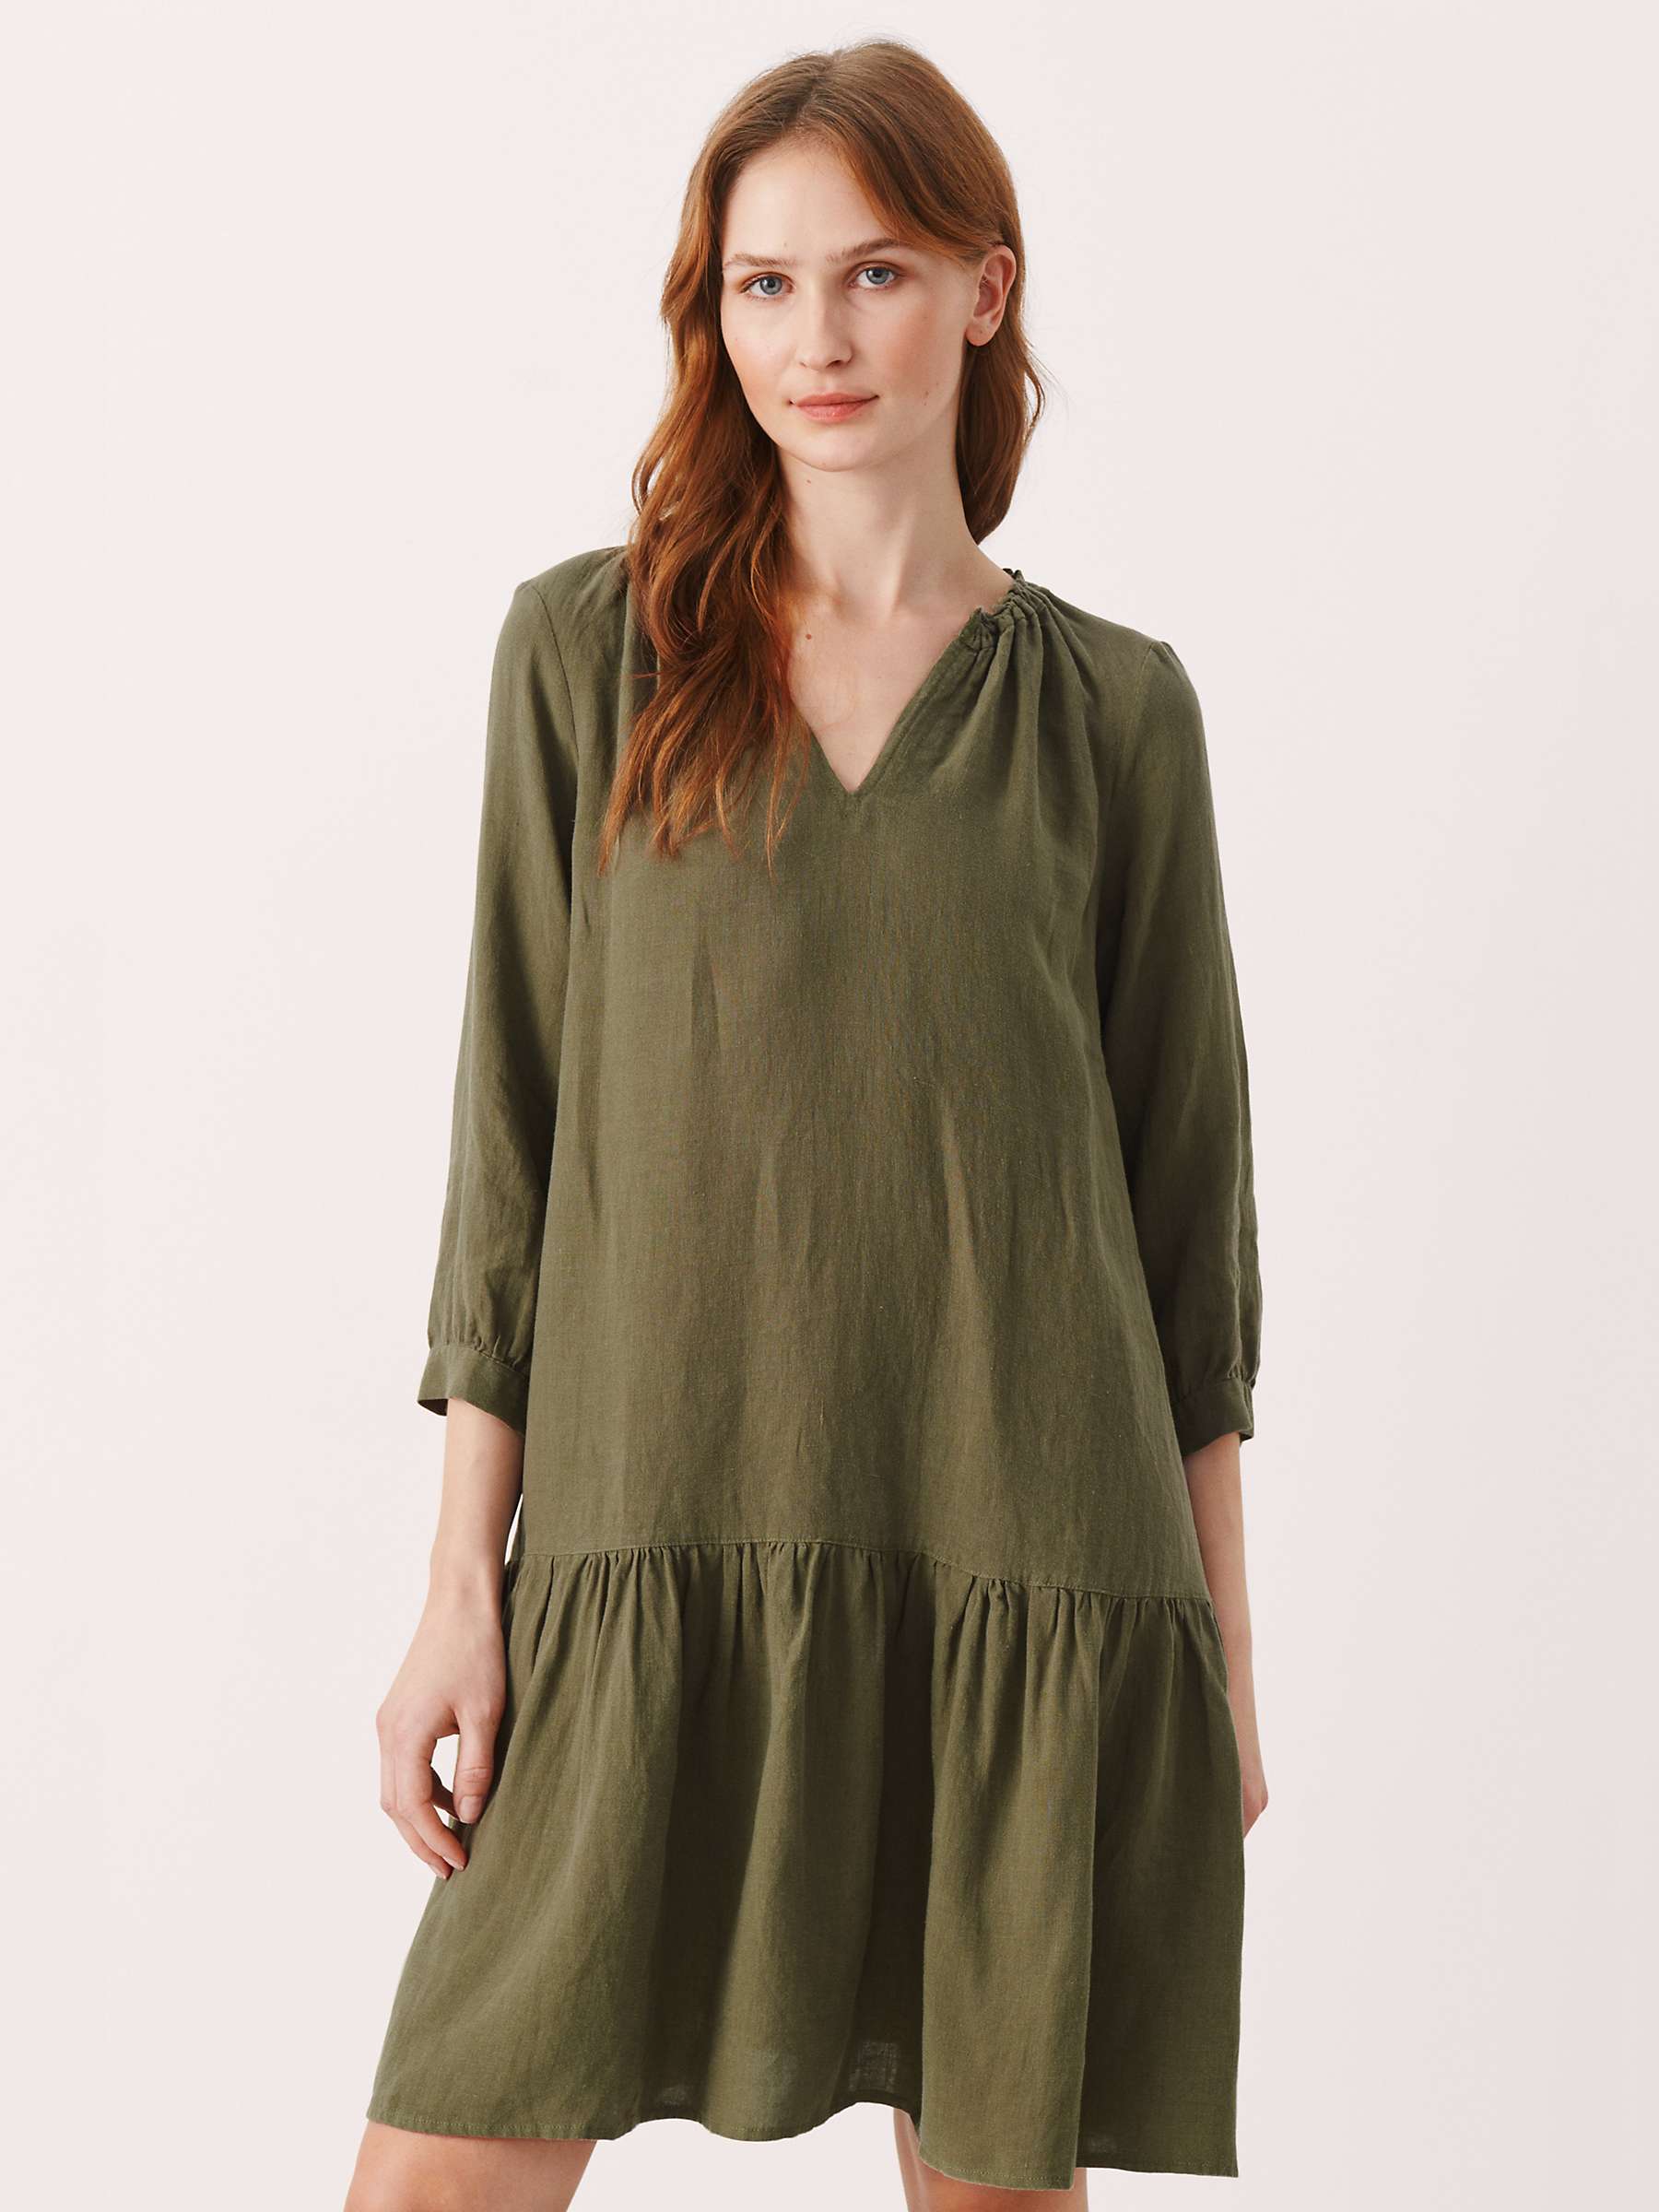 Buy Part Two Chania Relaxed Fit Linen Knee Length Dress, Kalamata Online at johnlewis.com